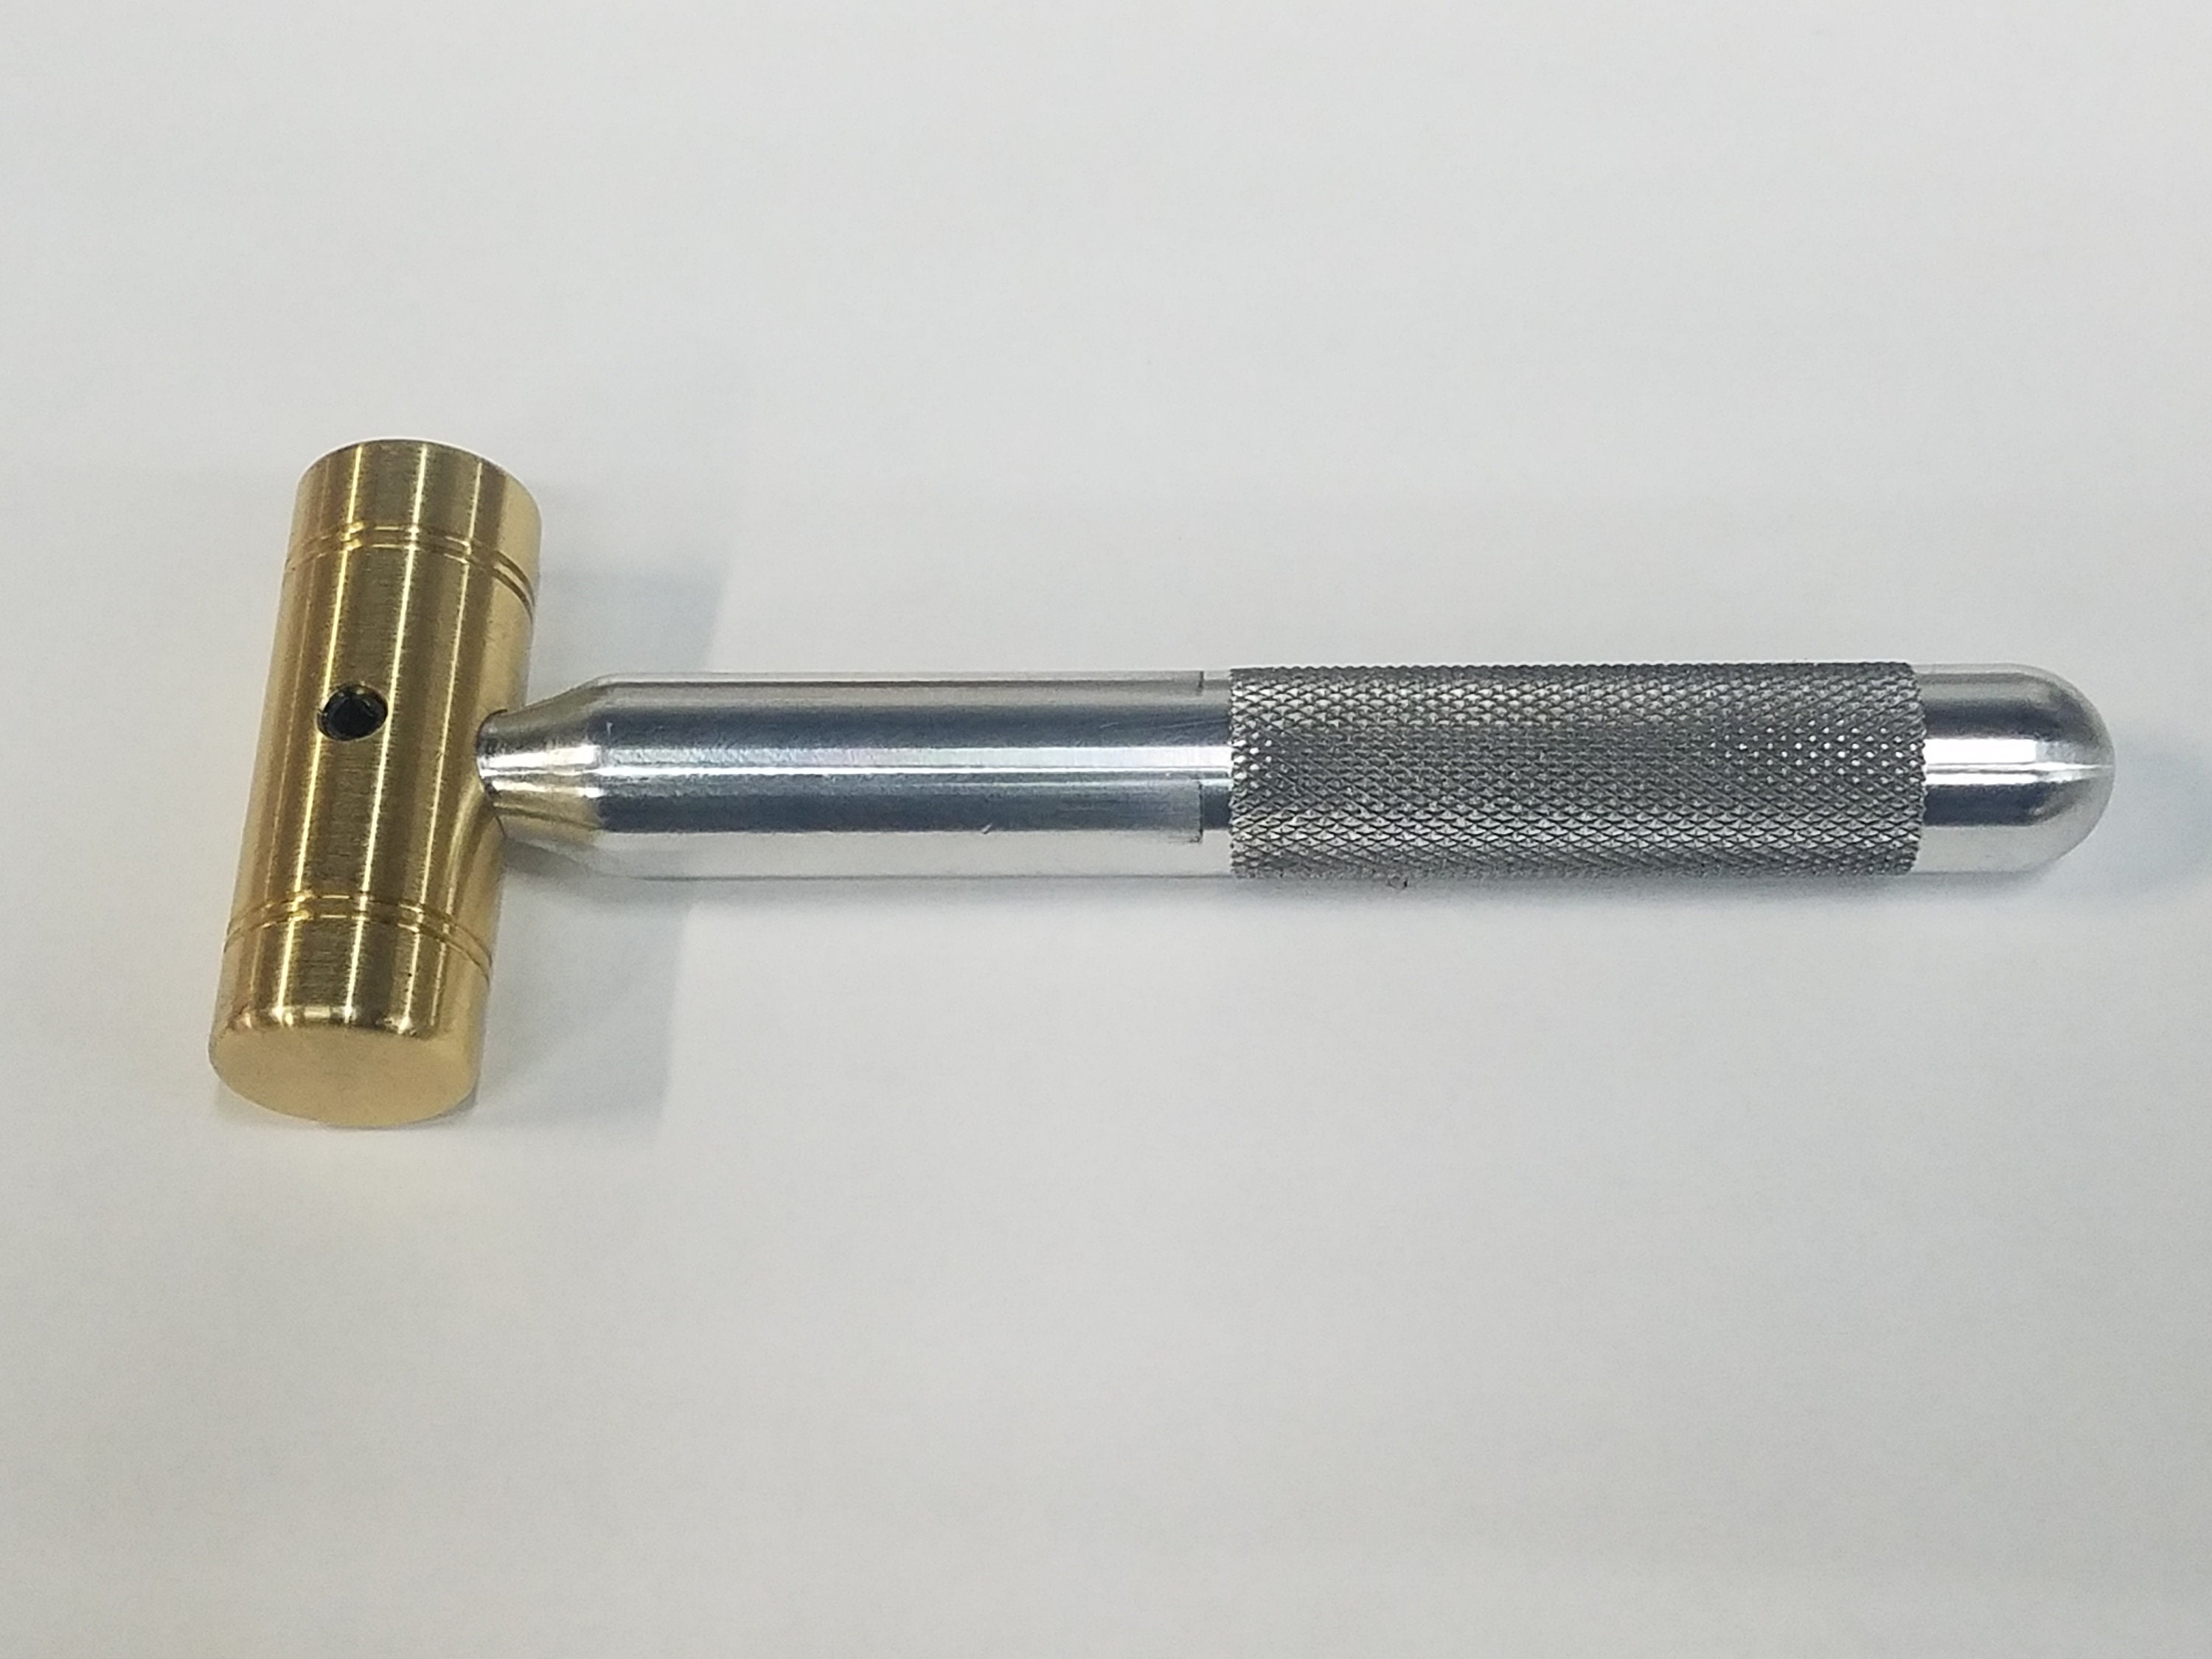 4 OZ. Small Brass Hammer Knurled 5/8 Aluminum Handle Excellent Grip Made in  the USA -  Canada